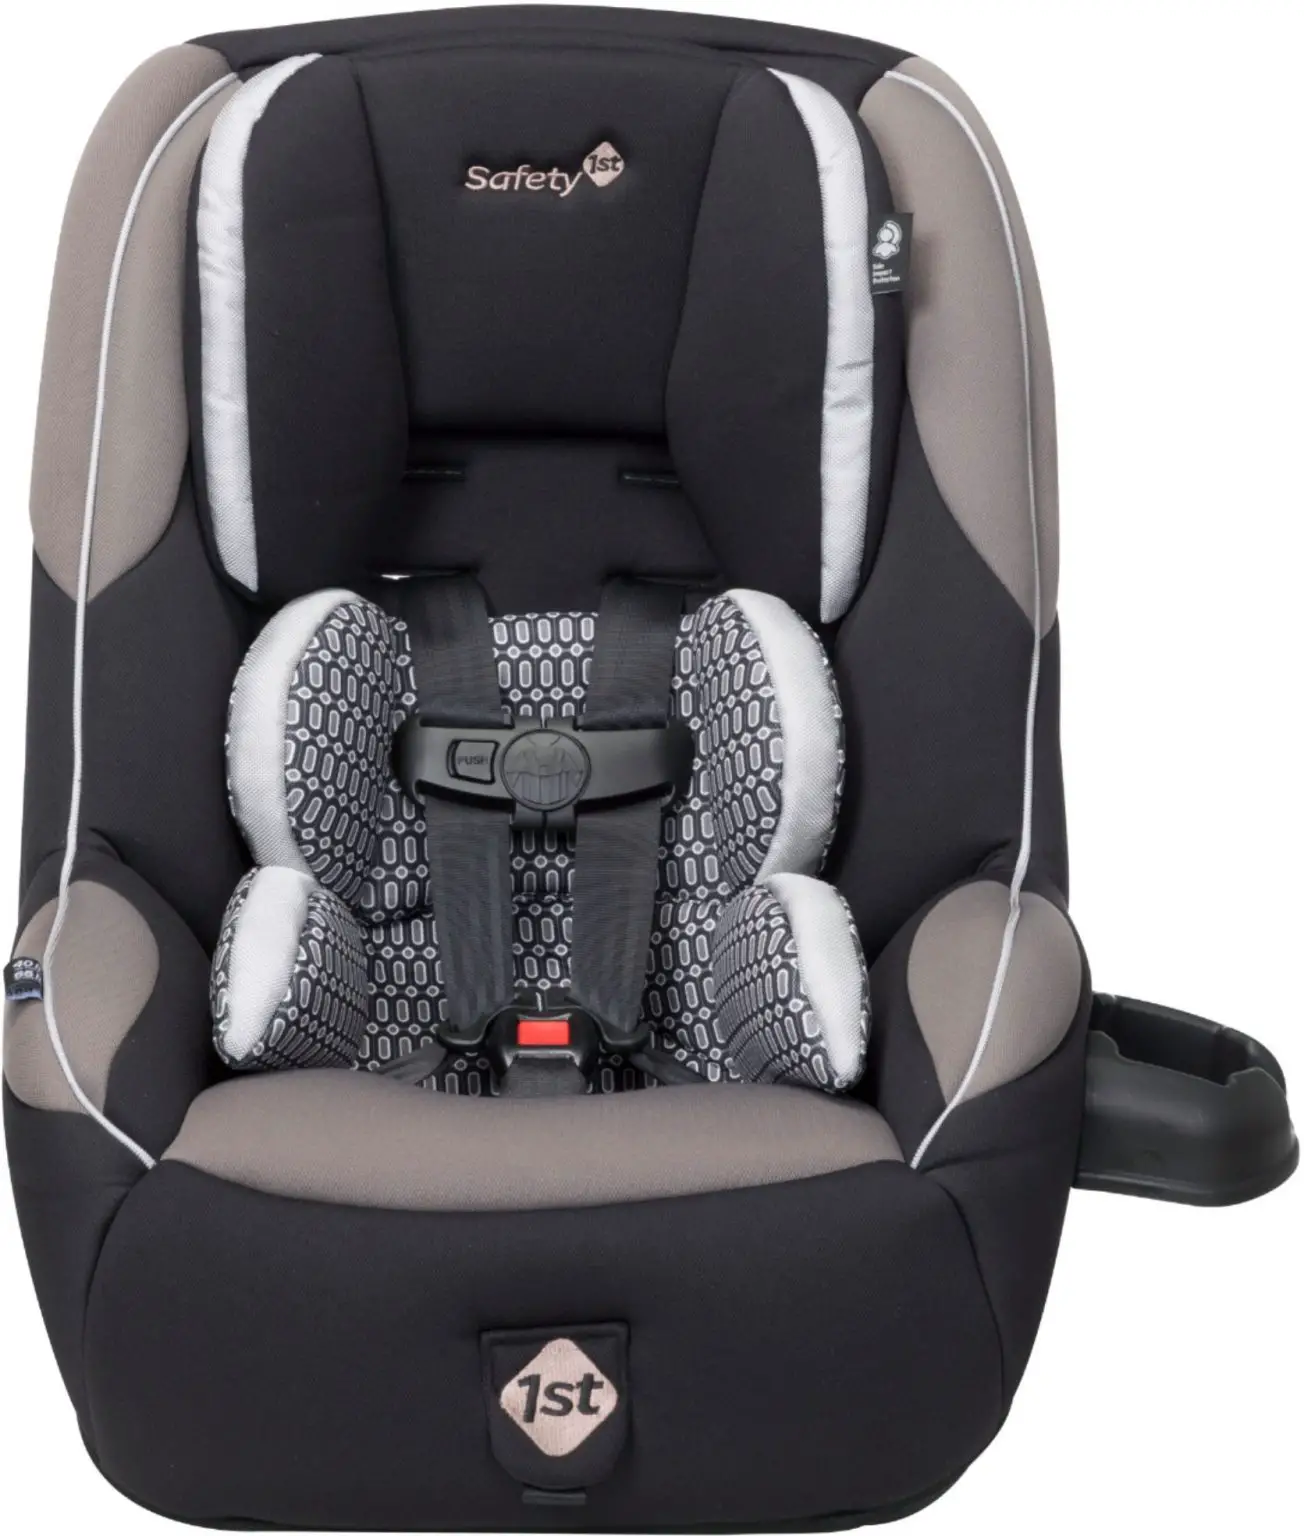 Safety 1st Guide 65 Convertible Car Seat Review Auto by Mars